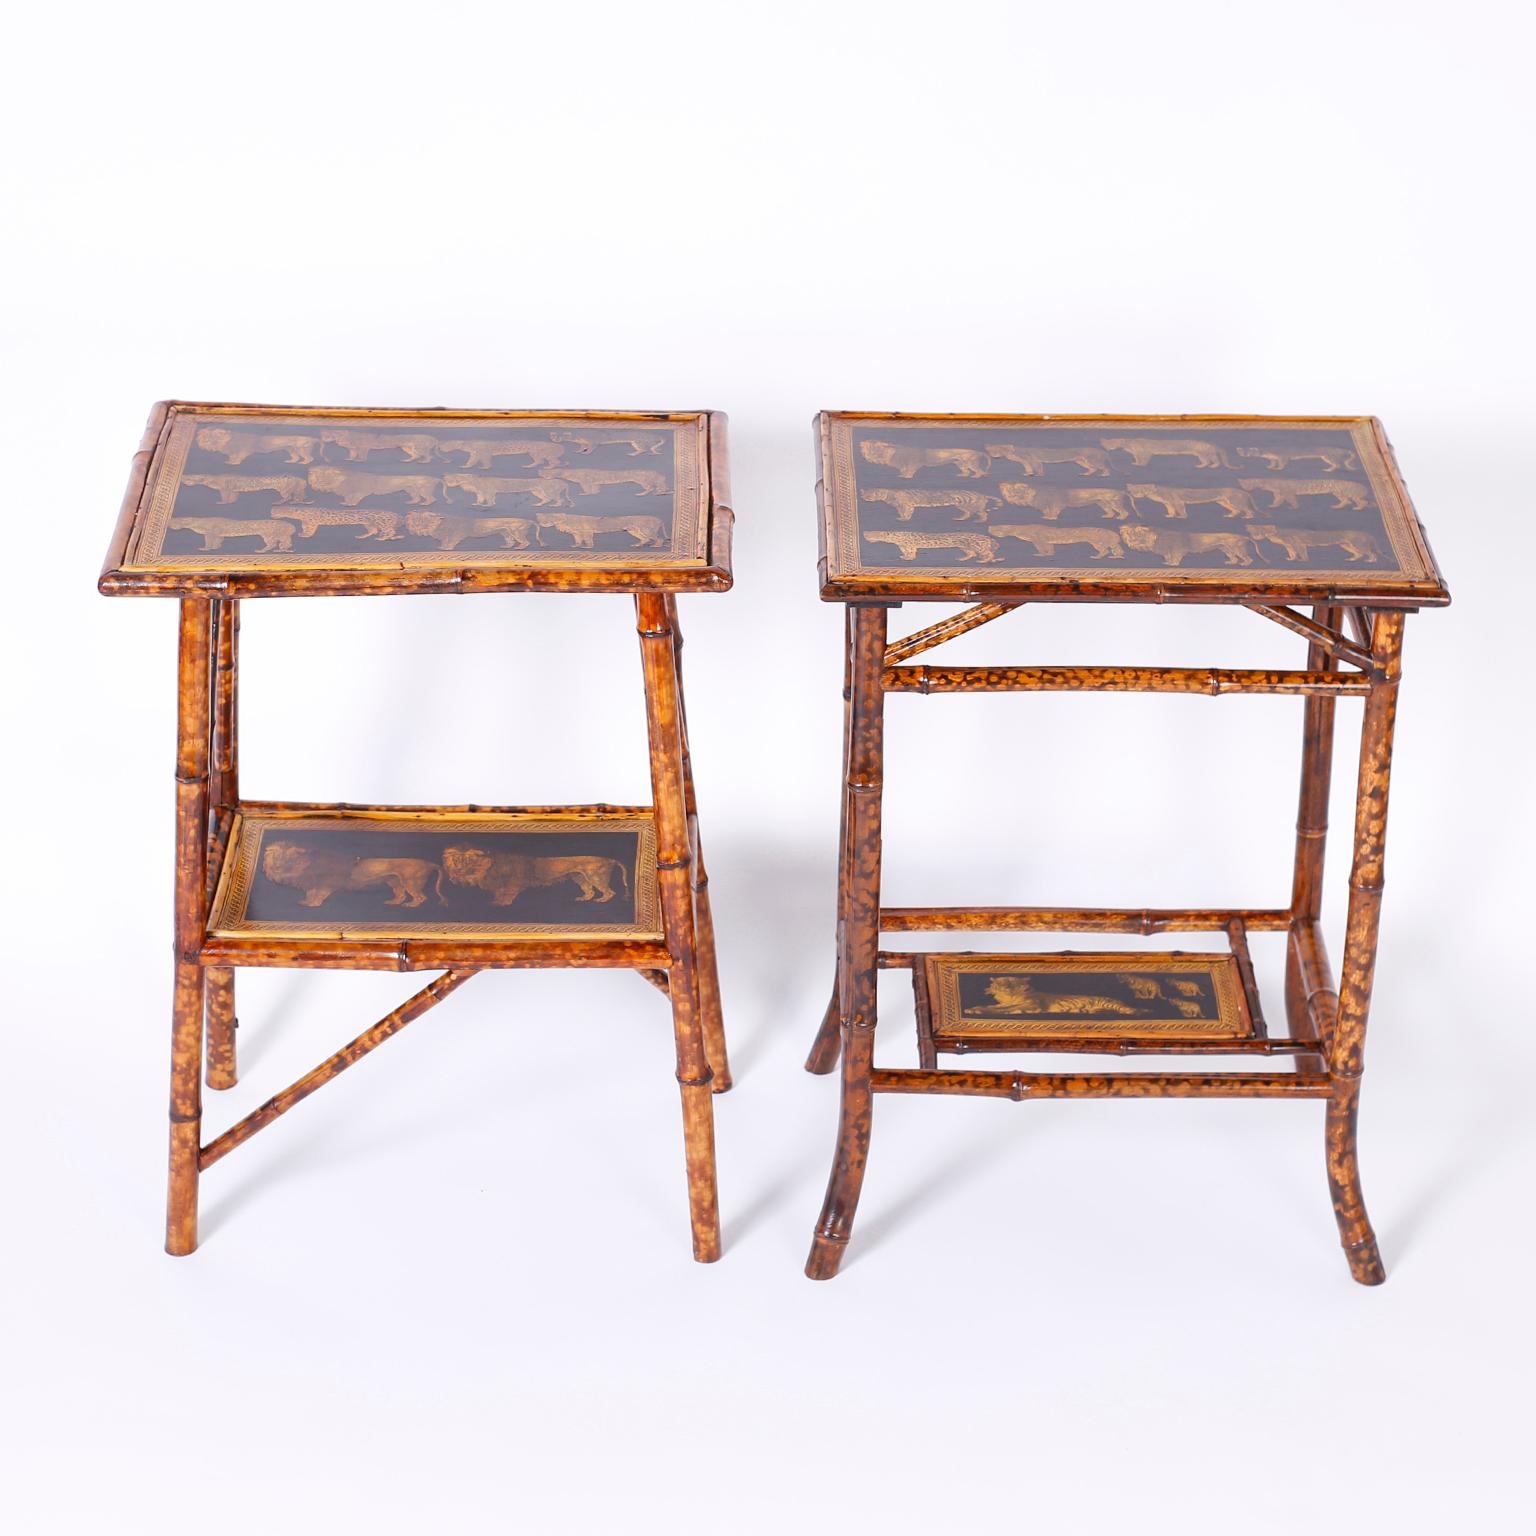 British Colonial Near Pair of Bamboo End Tables with Big Cat Motif